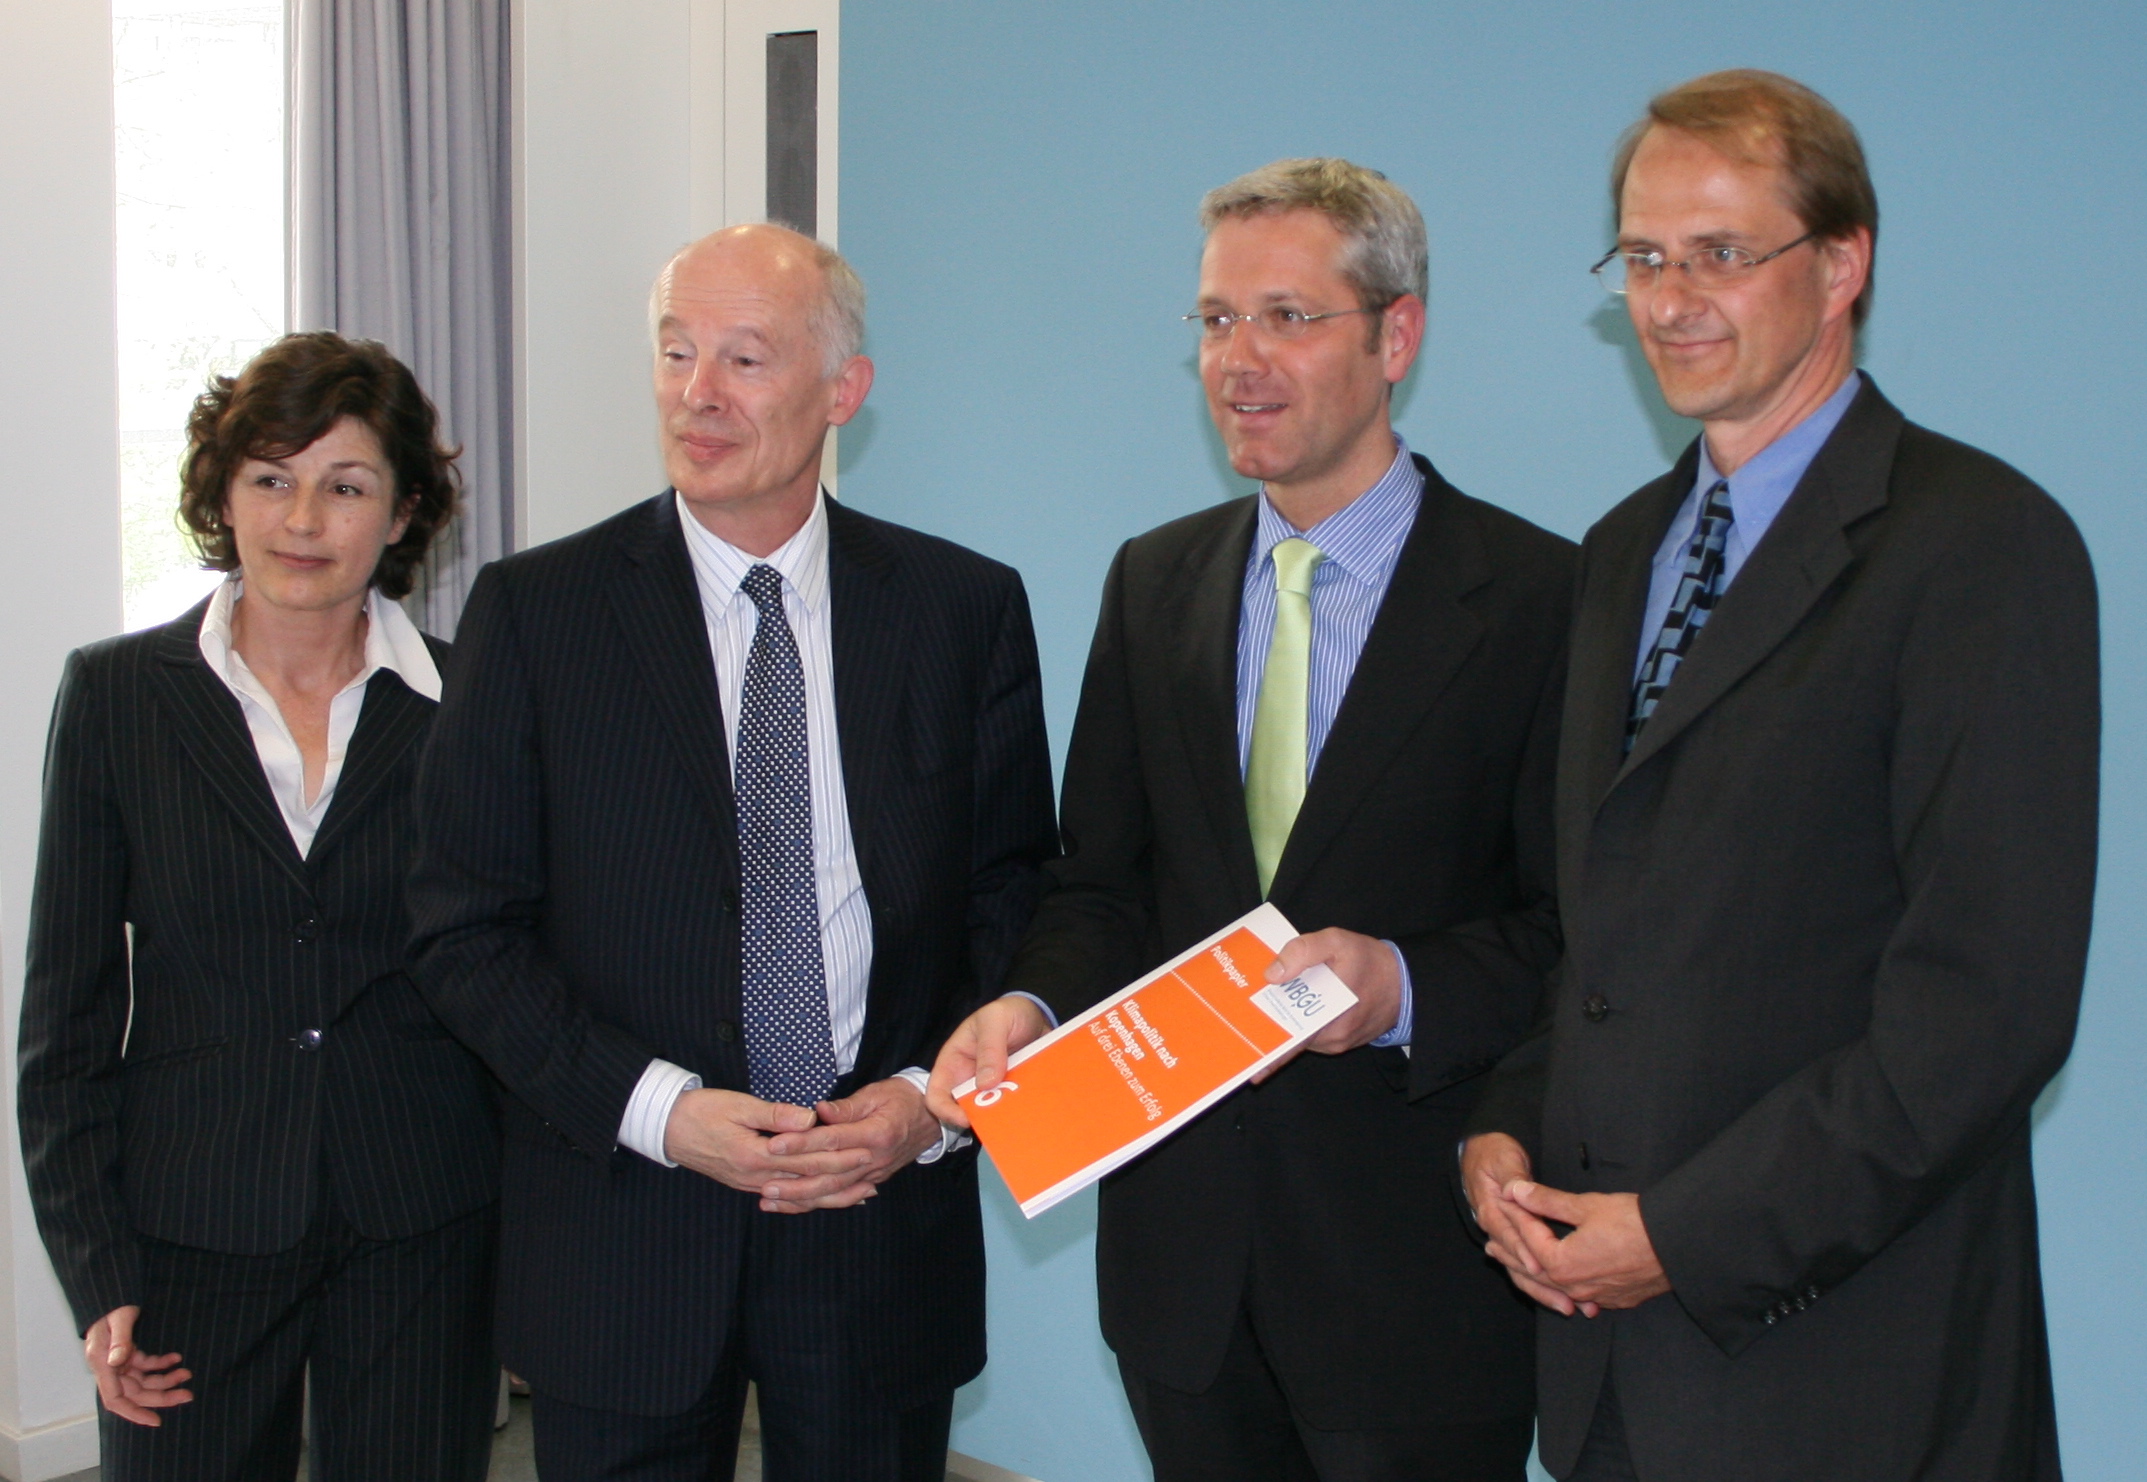 Submission of the WBGU Policy Paper "Climate Policy Post-Copenhagen" to Federal Minister for Environment Dr Norbert Röttgen.